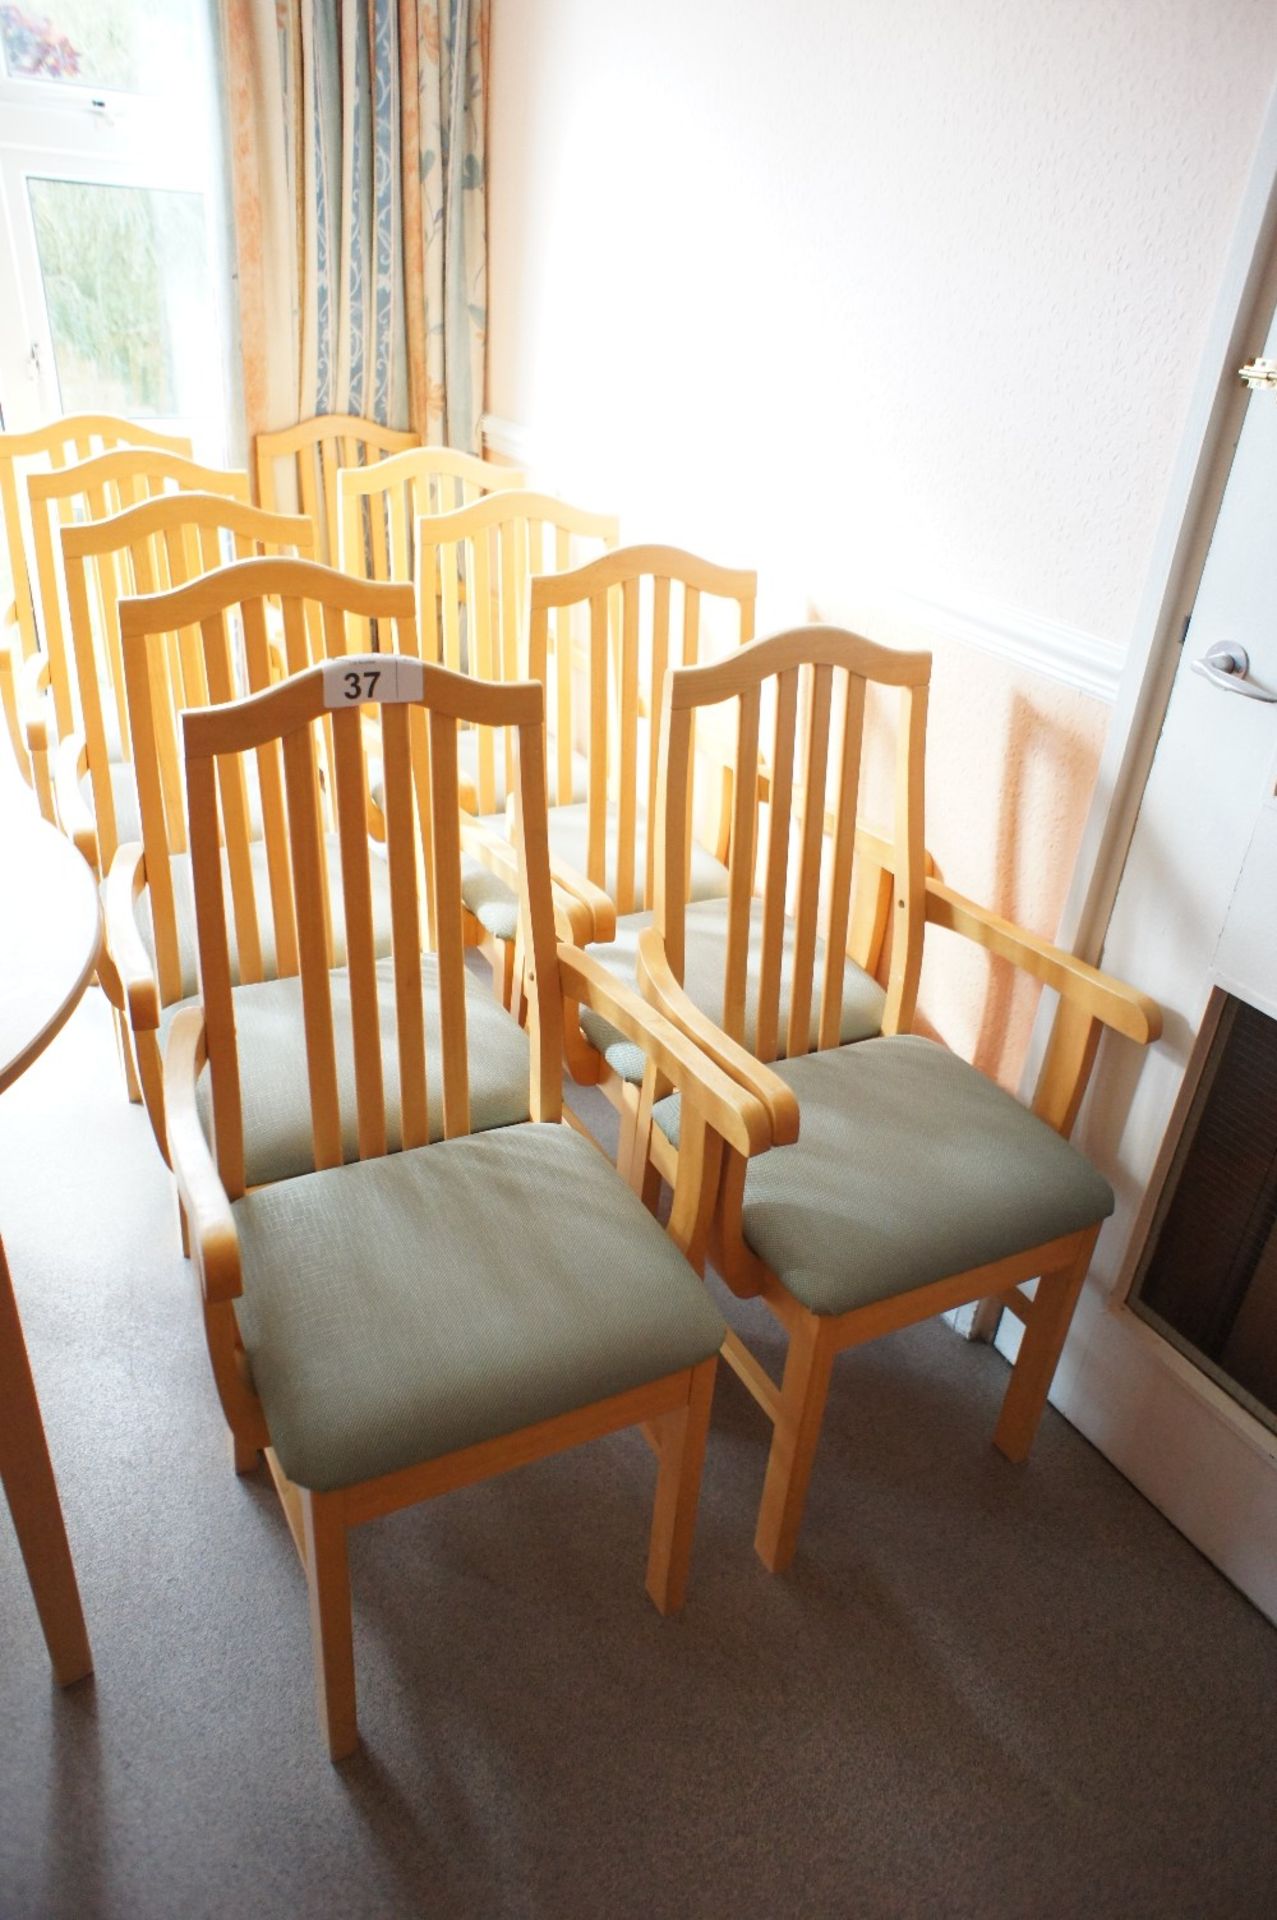 10 lightwood framed canteen armchairs with green easy clean upholstered seats (located in room 17,